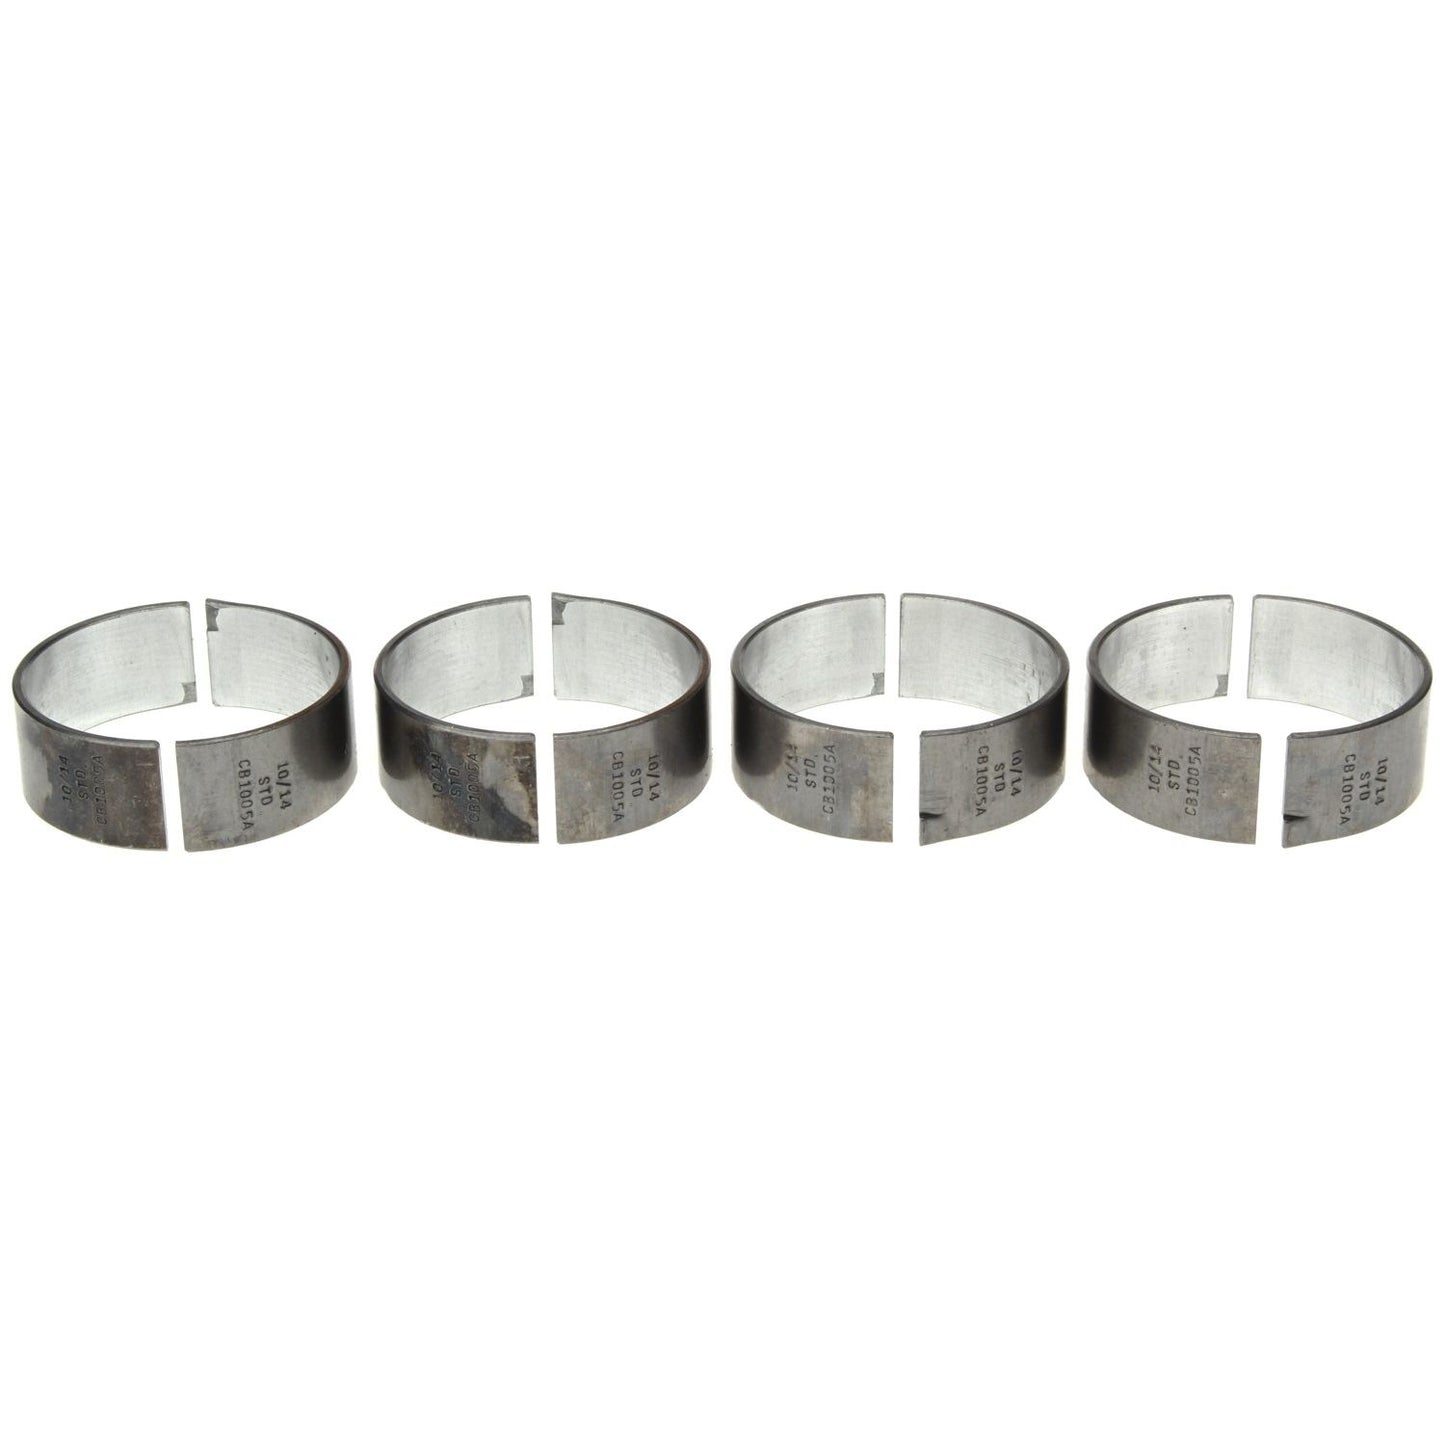 Clevite CB-1005A(4) Engine Connecting Rod Bearing Set